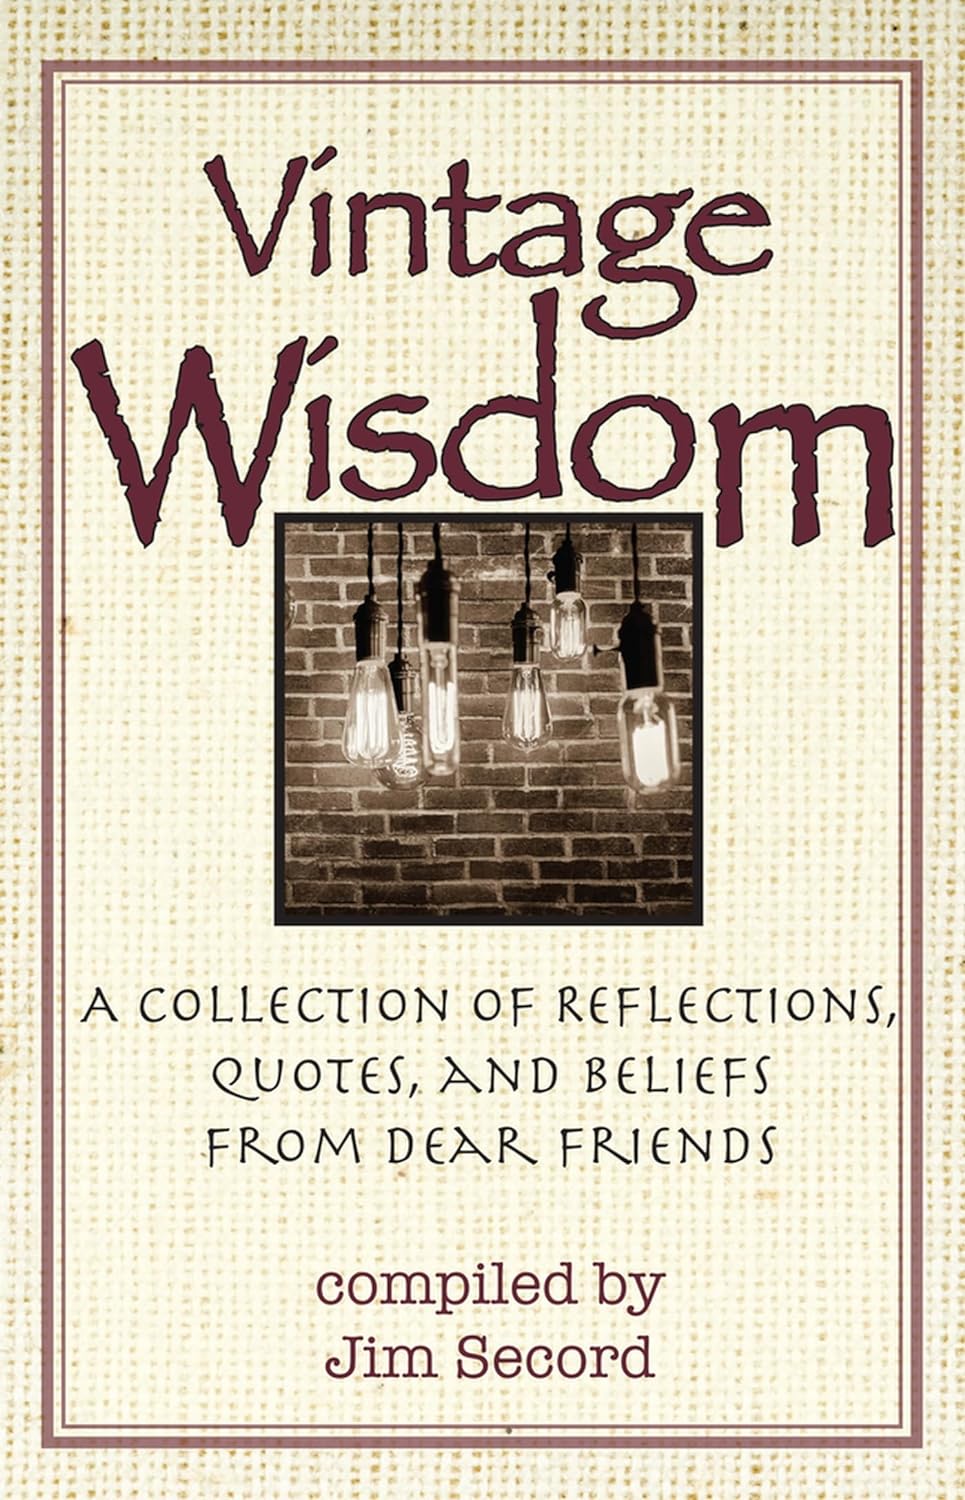 Vintage Wisdom: A Collection of Reflections, Quotes, and Beliefs from Dear Friends